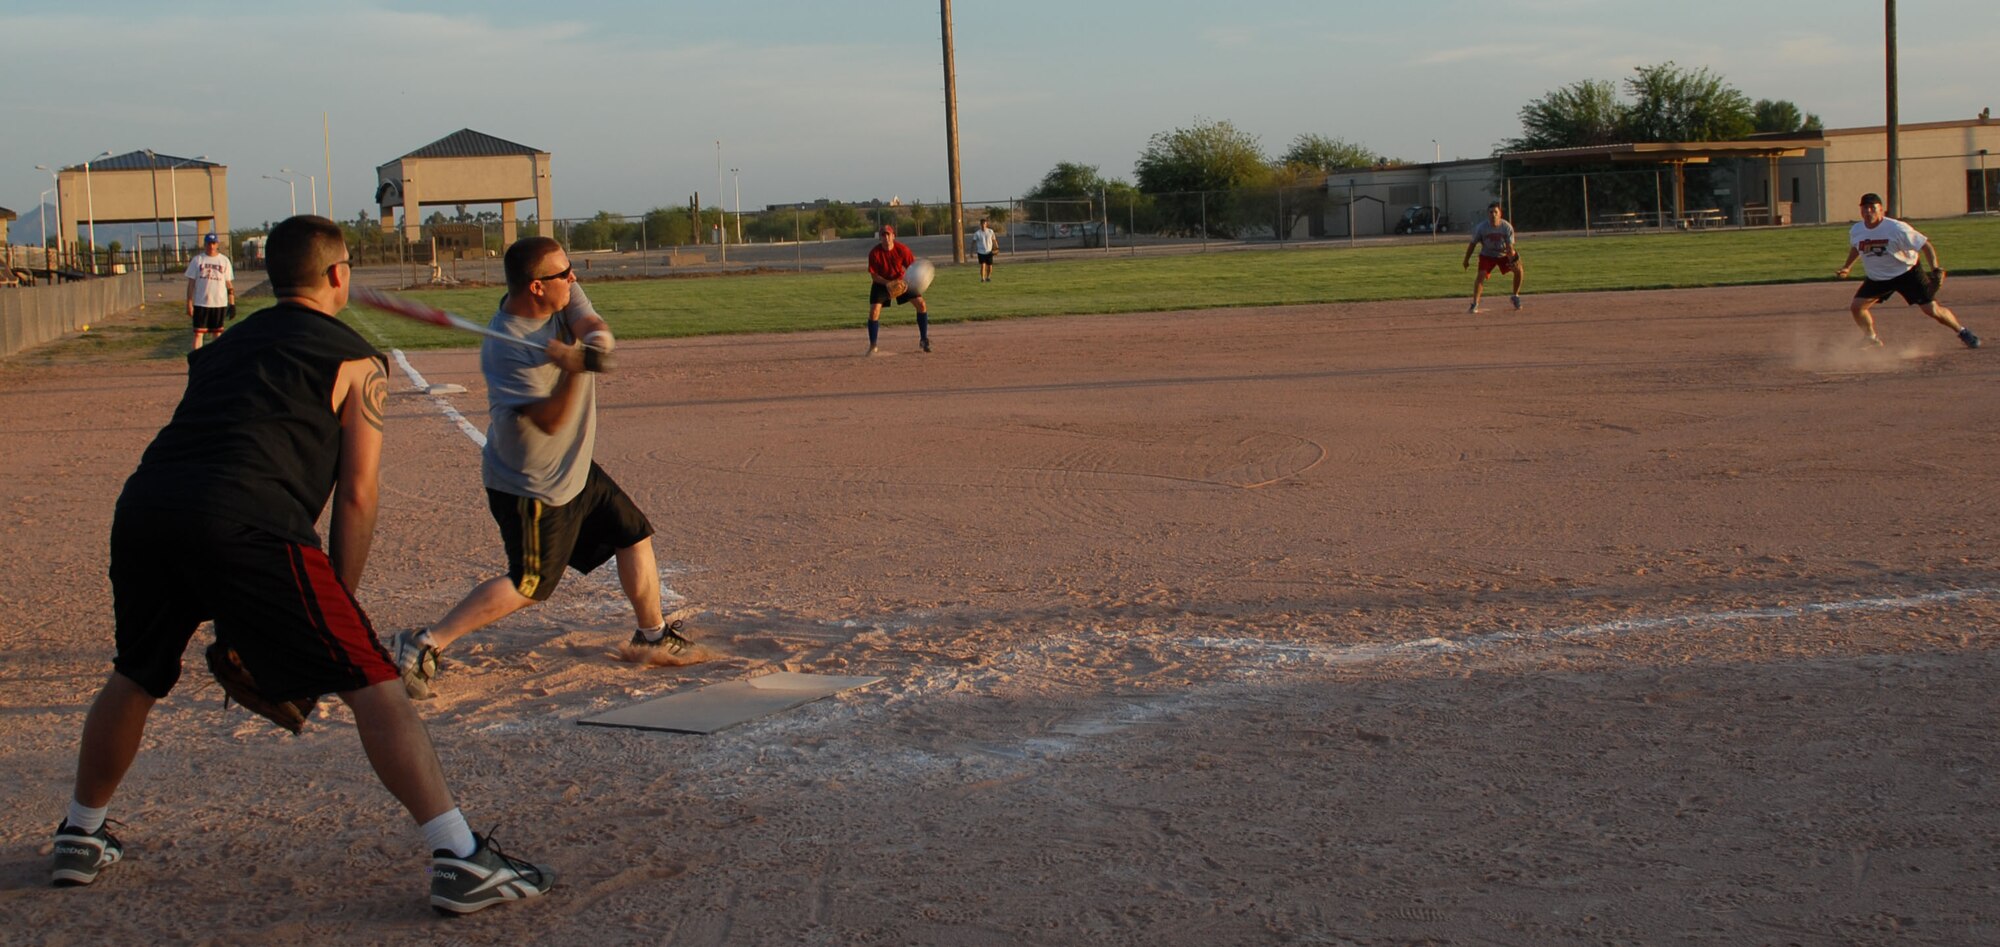 Jeff Martell, 56th Aircraft Maintenance Squadron second baseman, swings at a pitch from Marty Lund, 56th Logistics Readiness Squadron, as Richard Knick, 56th LRS, stands ready to catch, during the intramural softball championship Monday. LRS defeated AMXS 15-11 after seven innings of play.